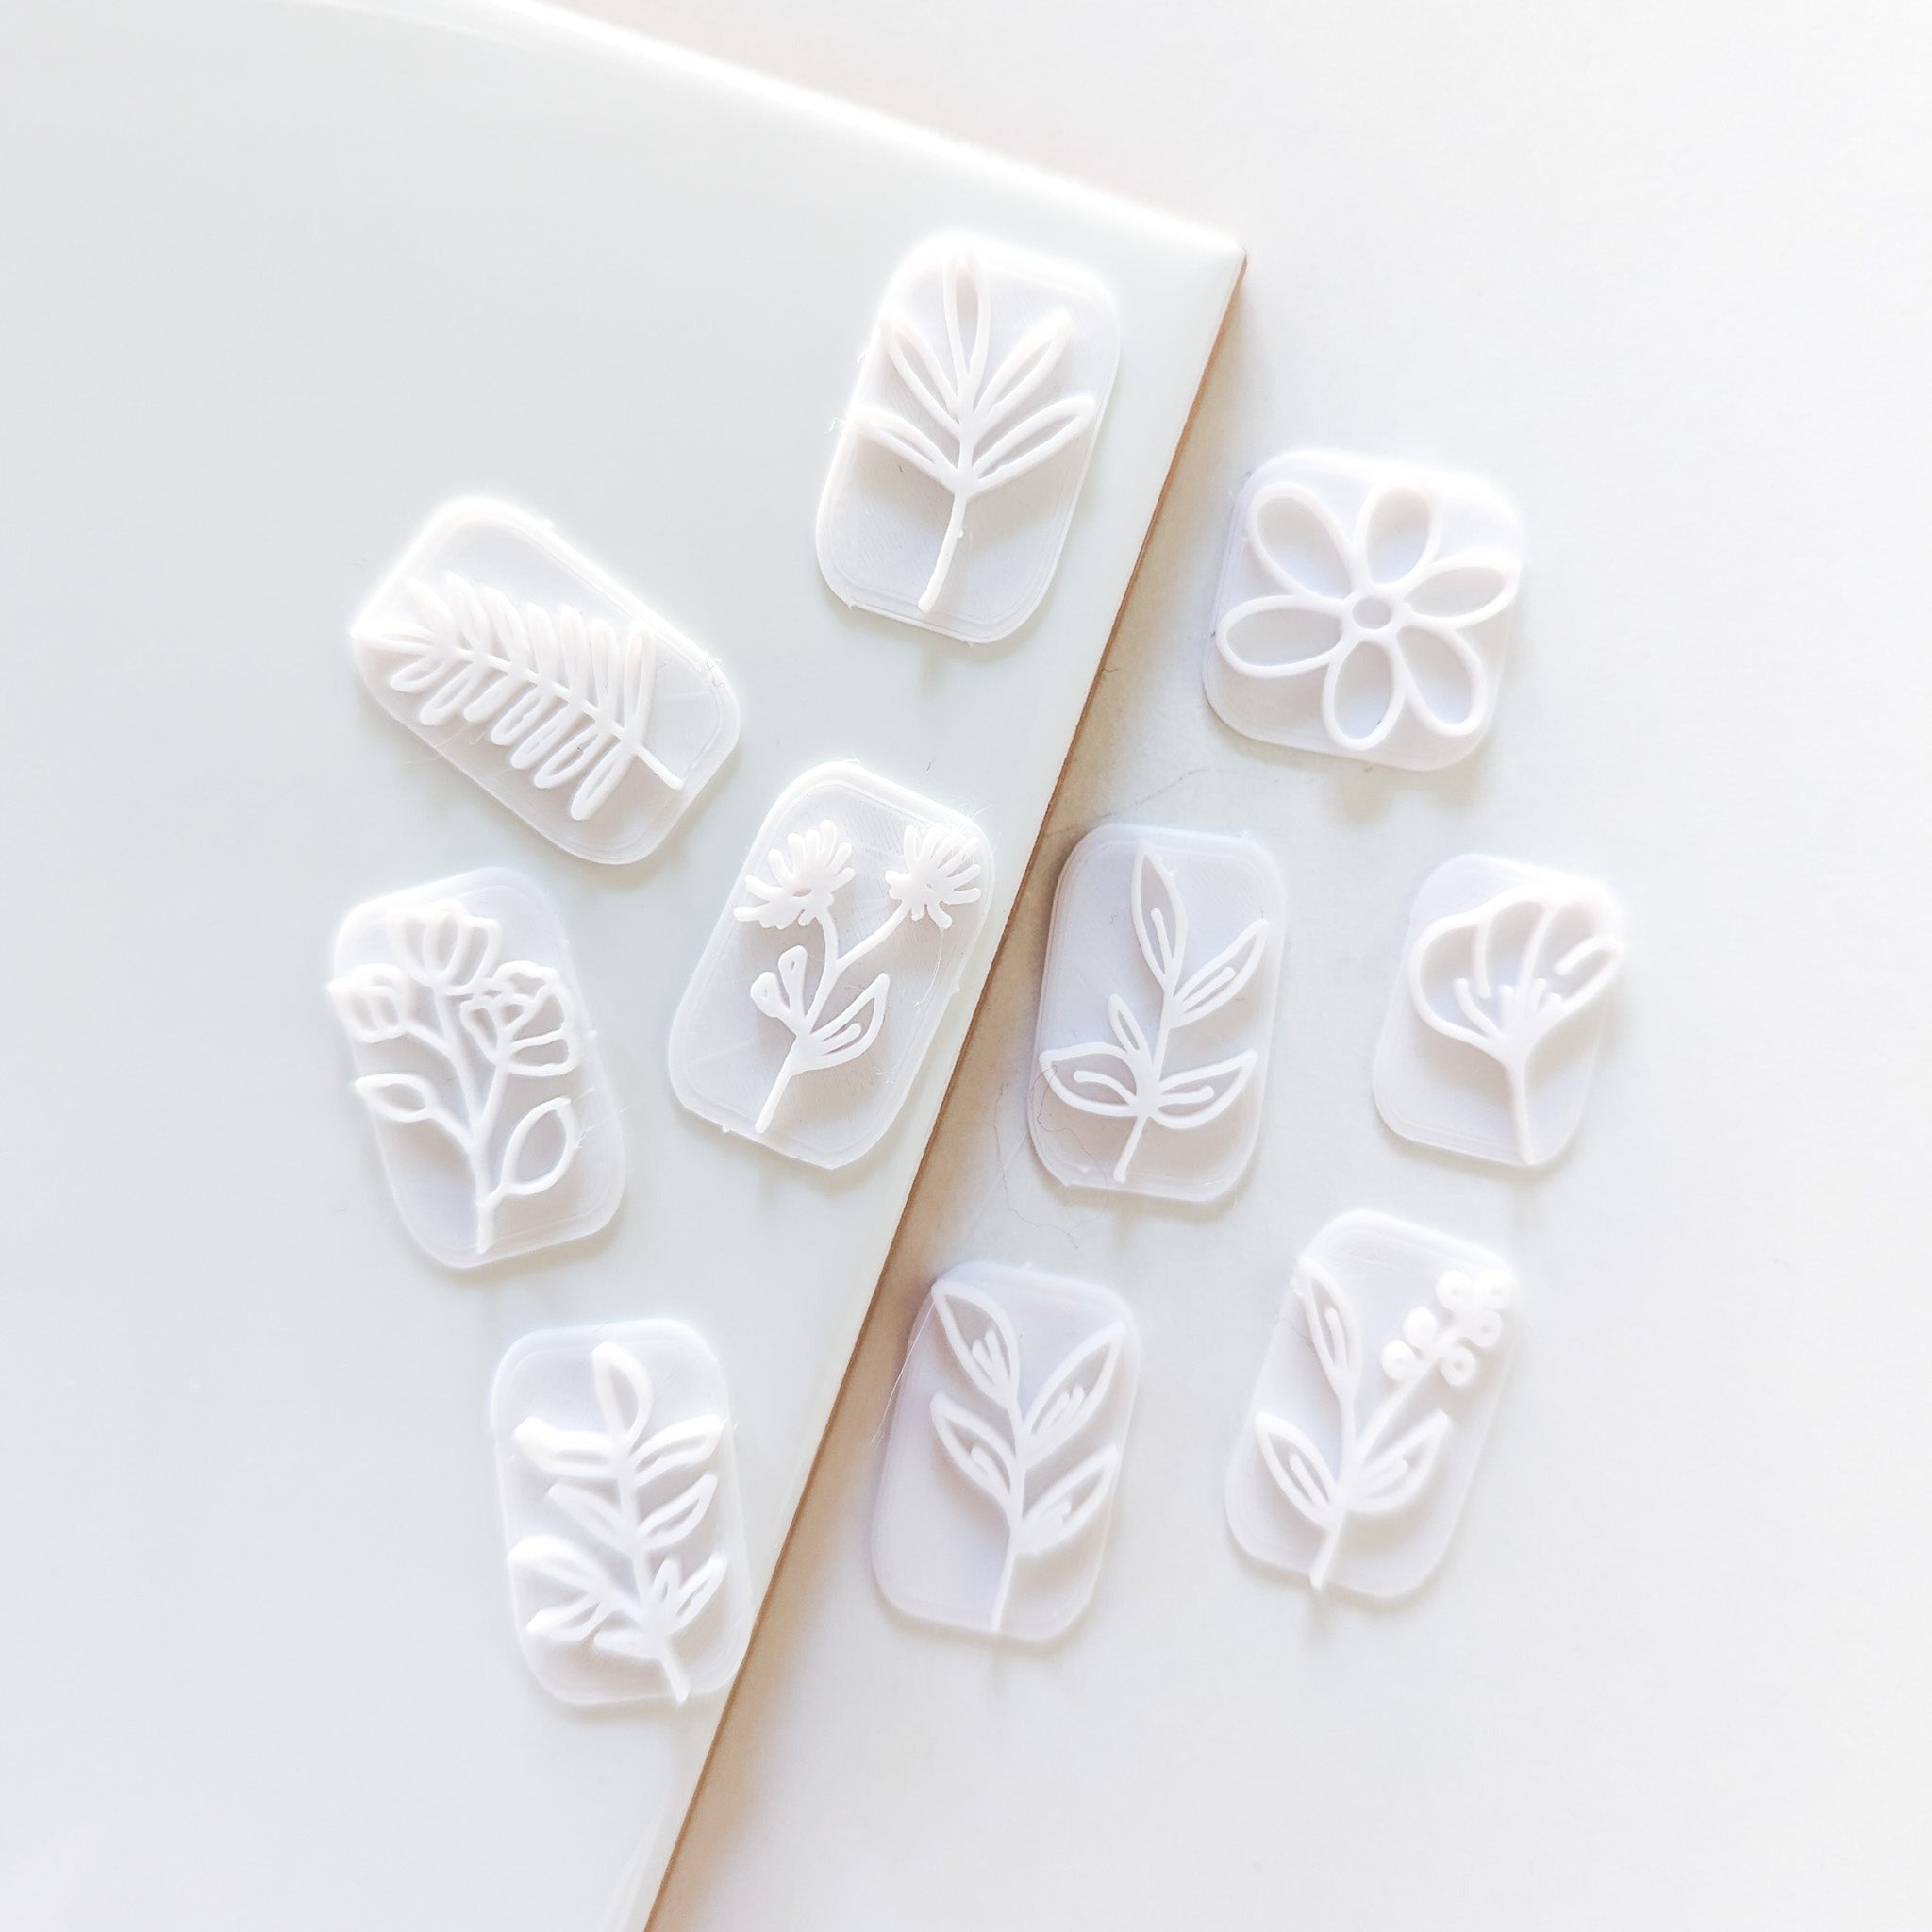 Botanical Clay Stamps